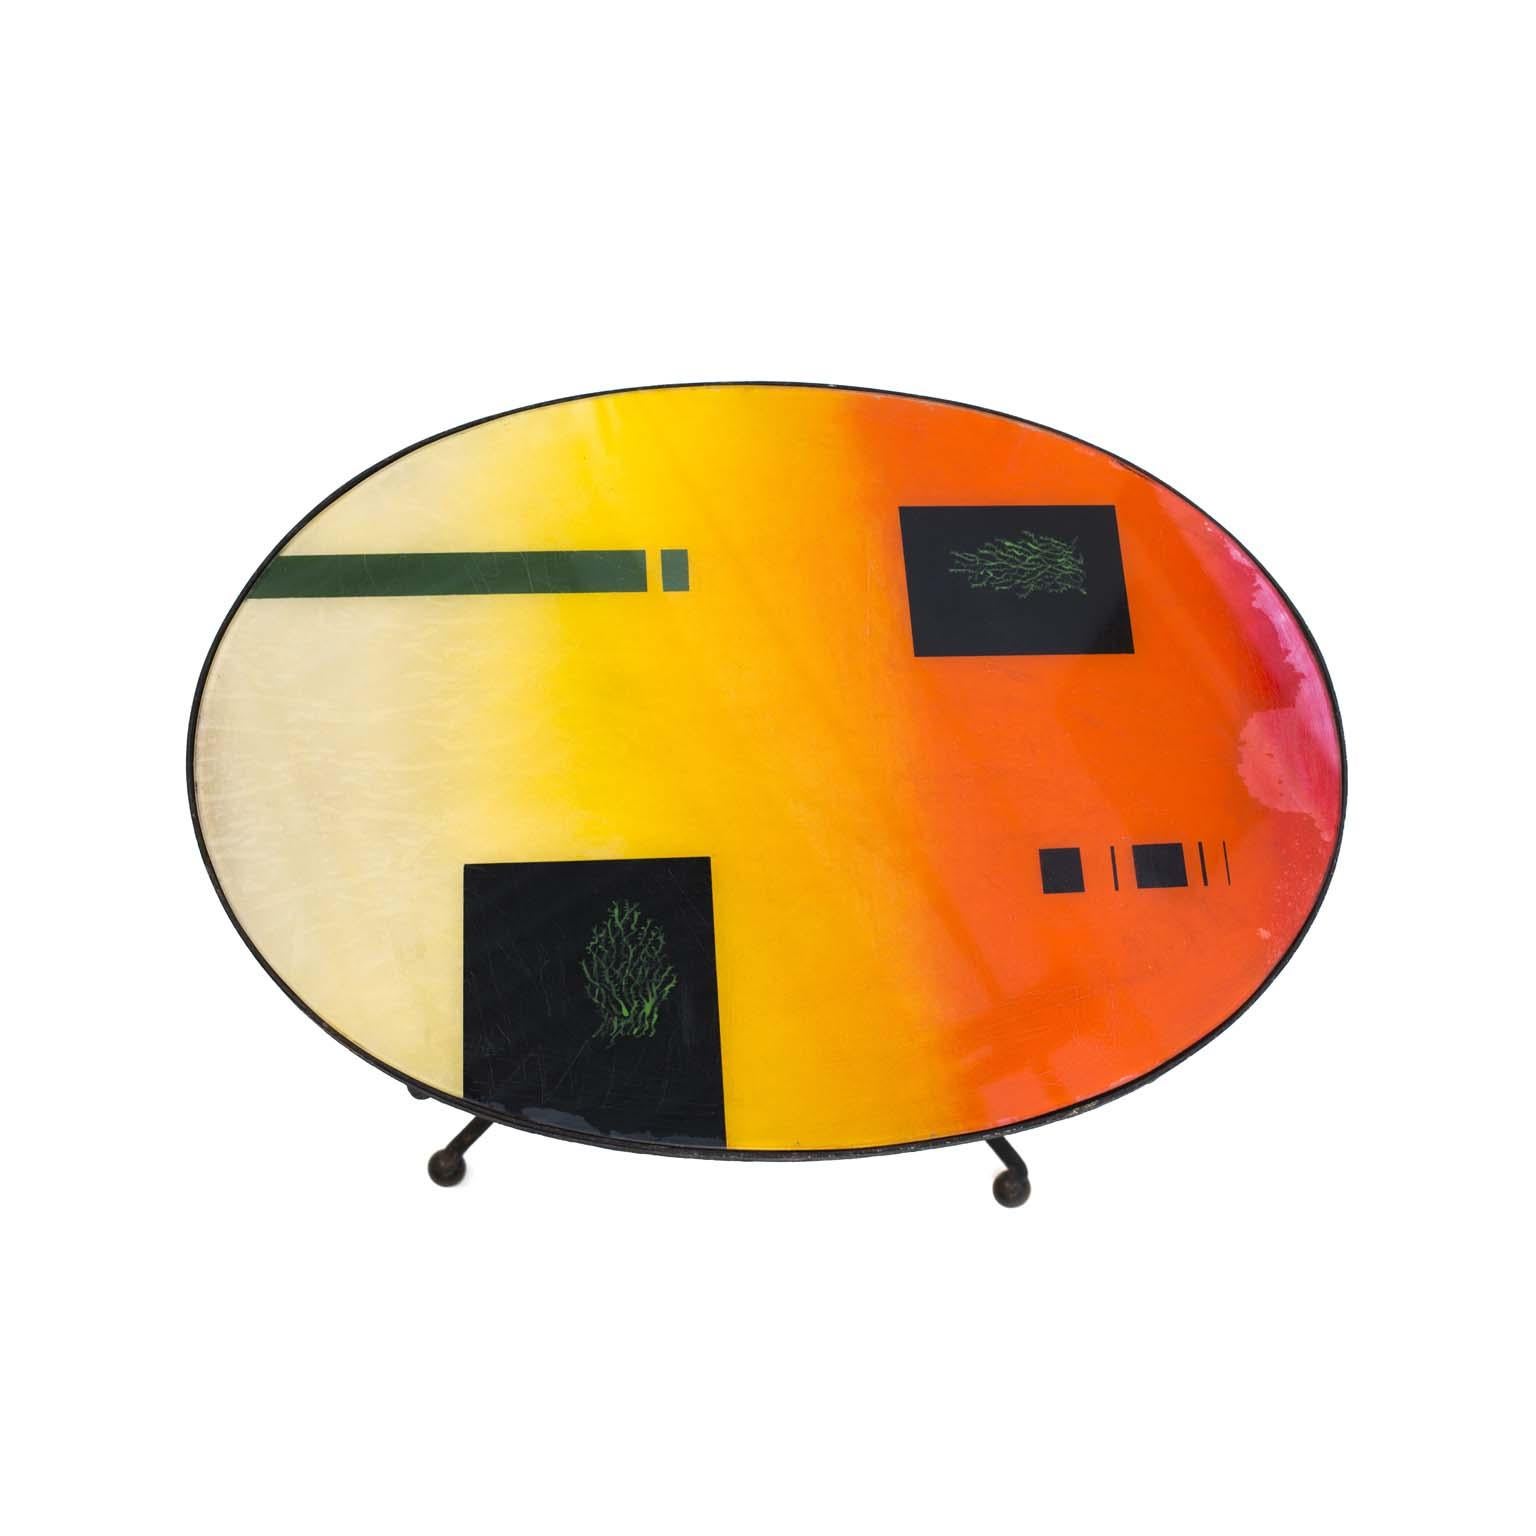 Abraham Palatnik midcentury Brazilian side table with colorful graphics, 1970s

Auxiliary table with iron structure with top with graphic design elaborated by Abraham Palatnik, famous Brazilian plastic artist.